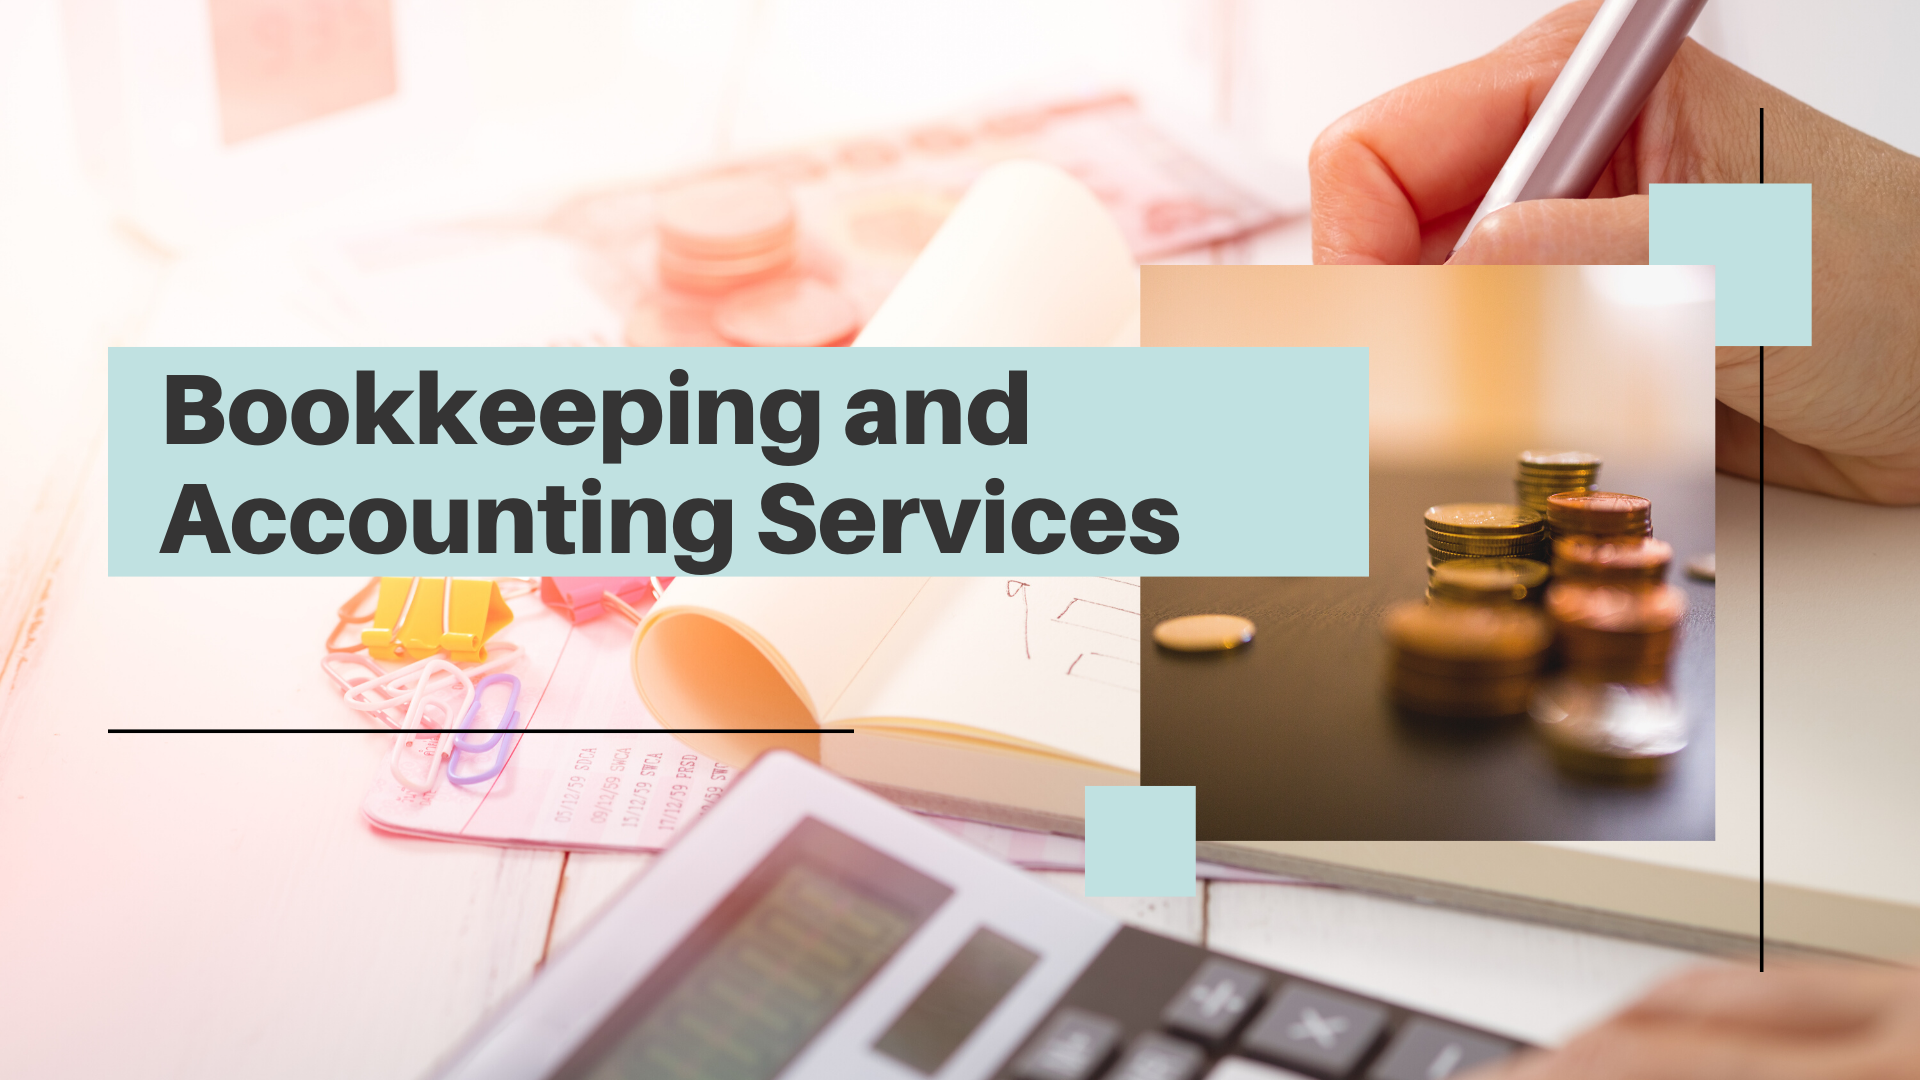 accounting and bookkeeping